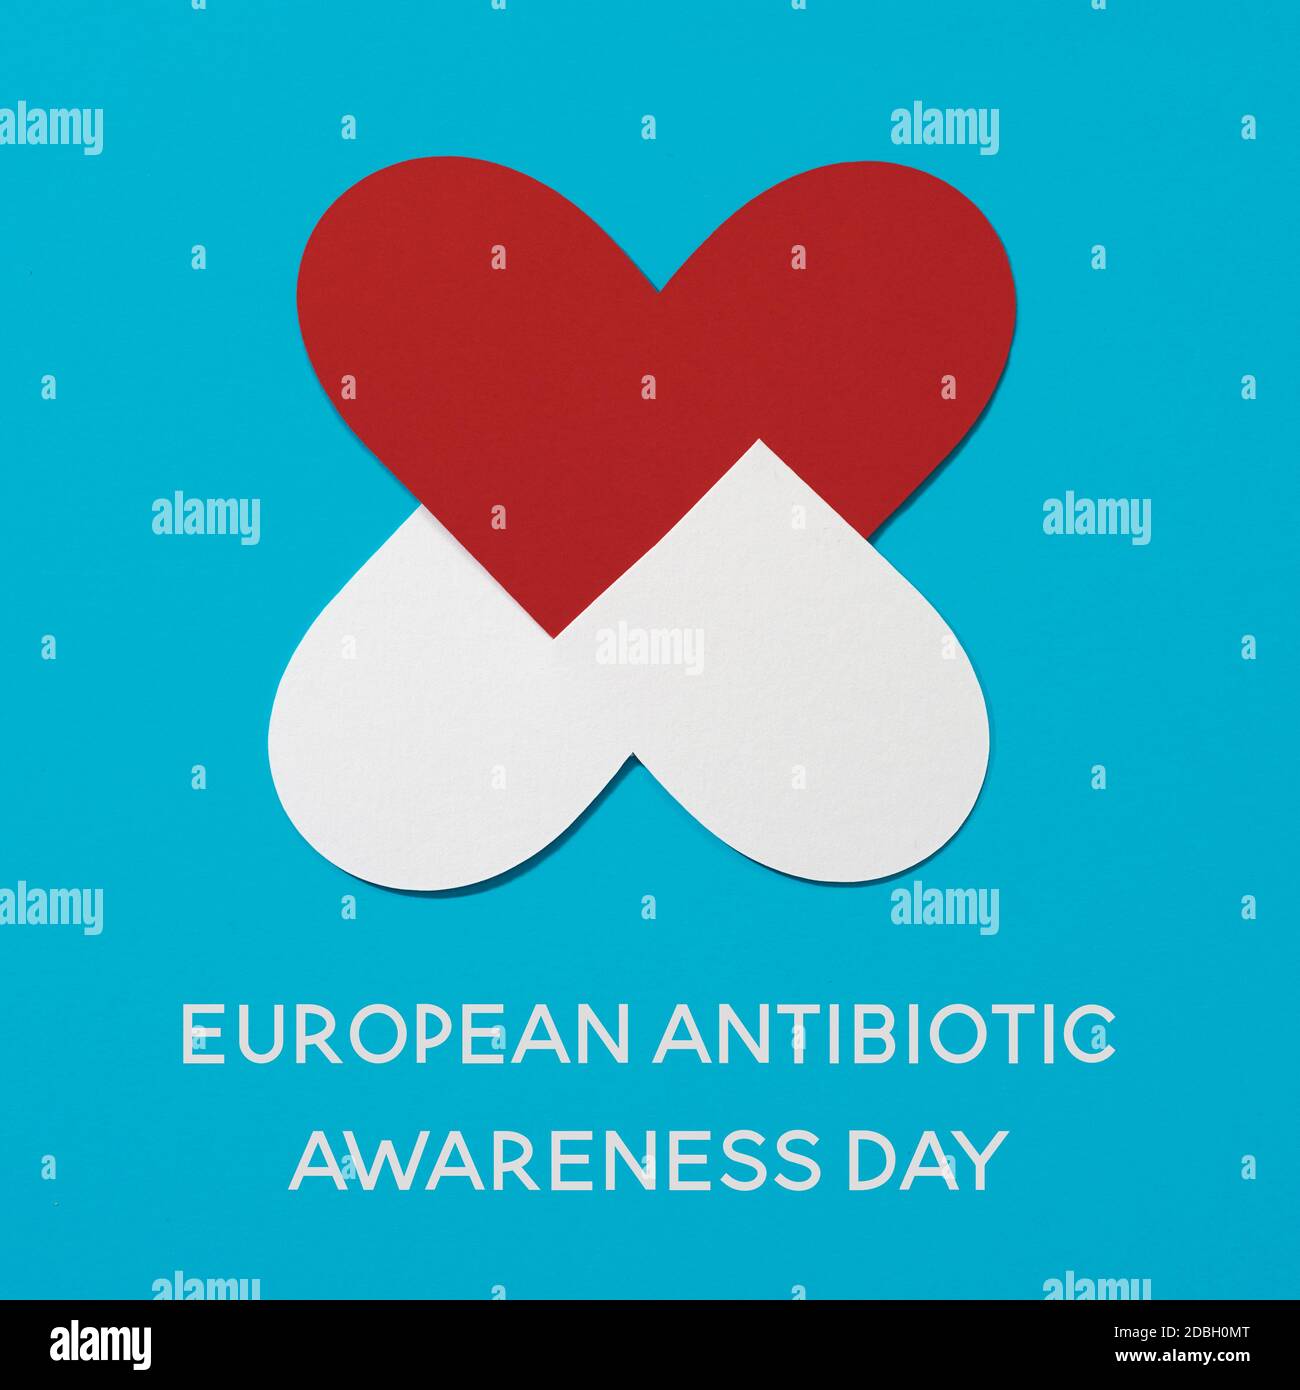 the antibiotic resistance symbol and the text european antibiotic awareness day on a blue background Stock Photo